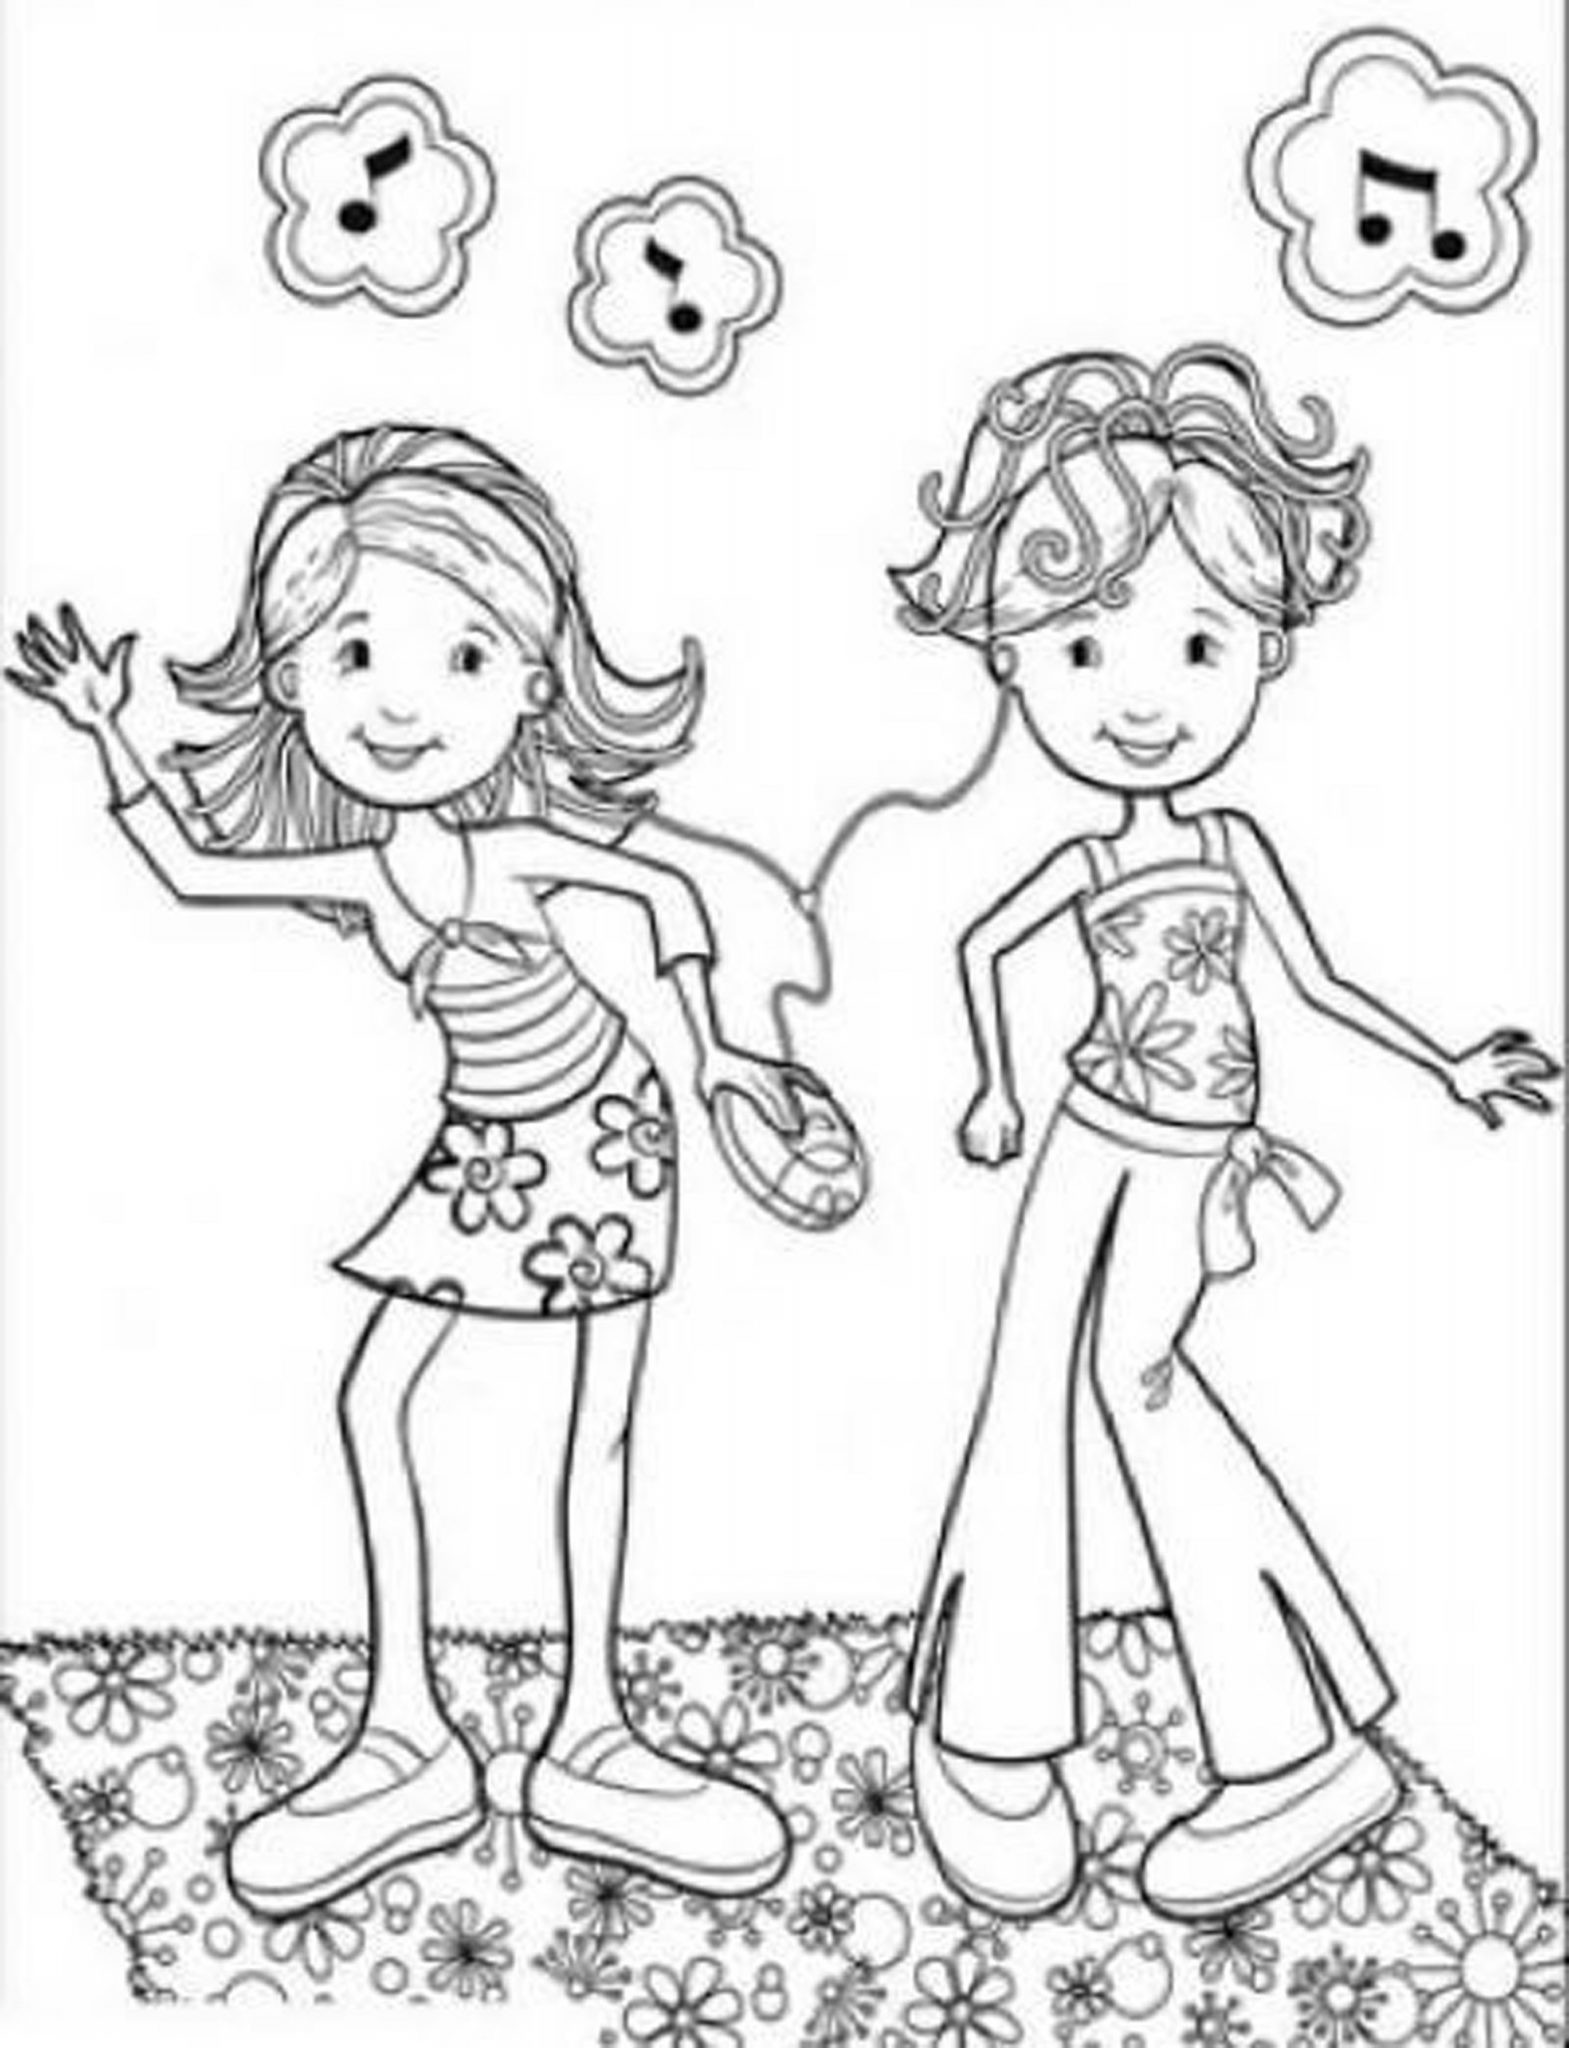 Coloring Pages Of Cute Girls
 cute coloring pages for girls